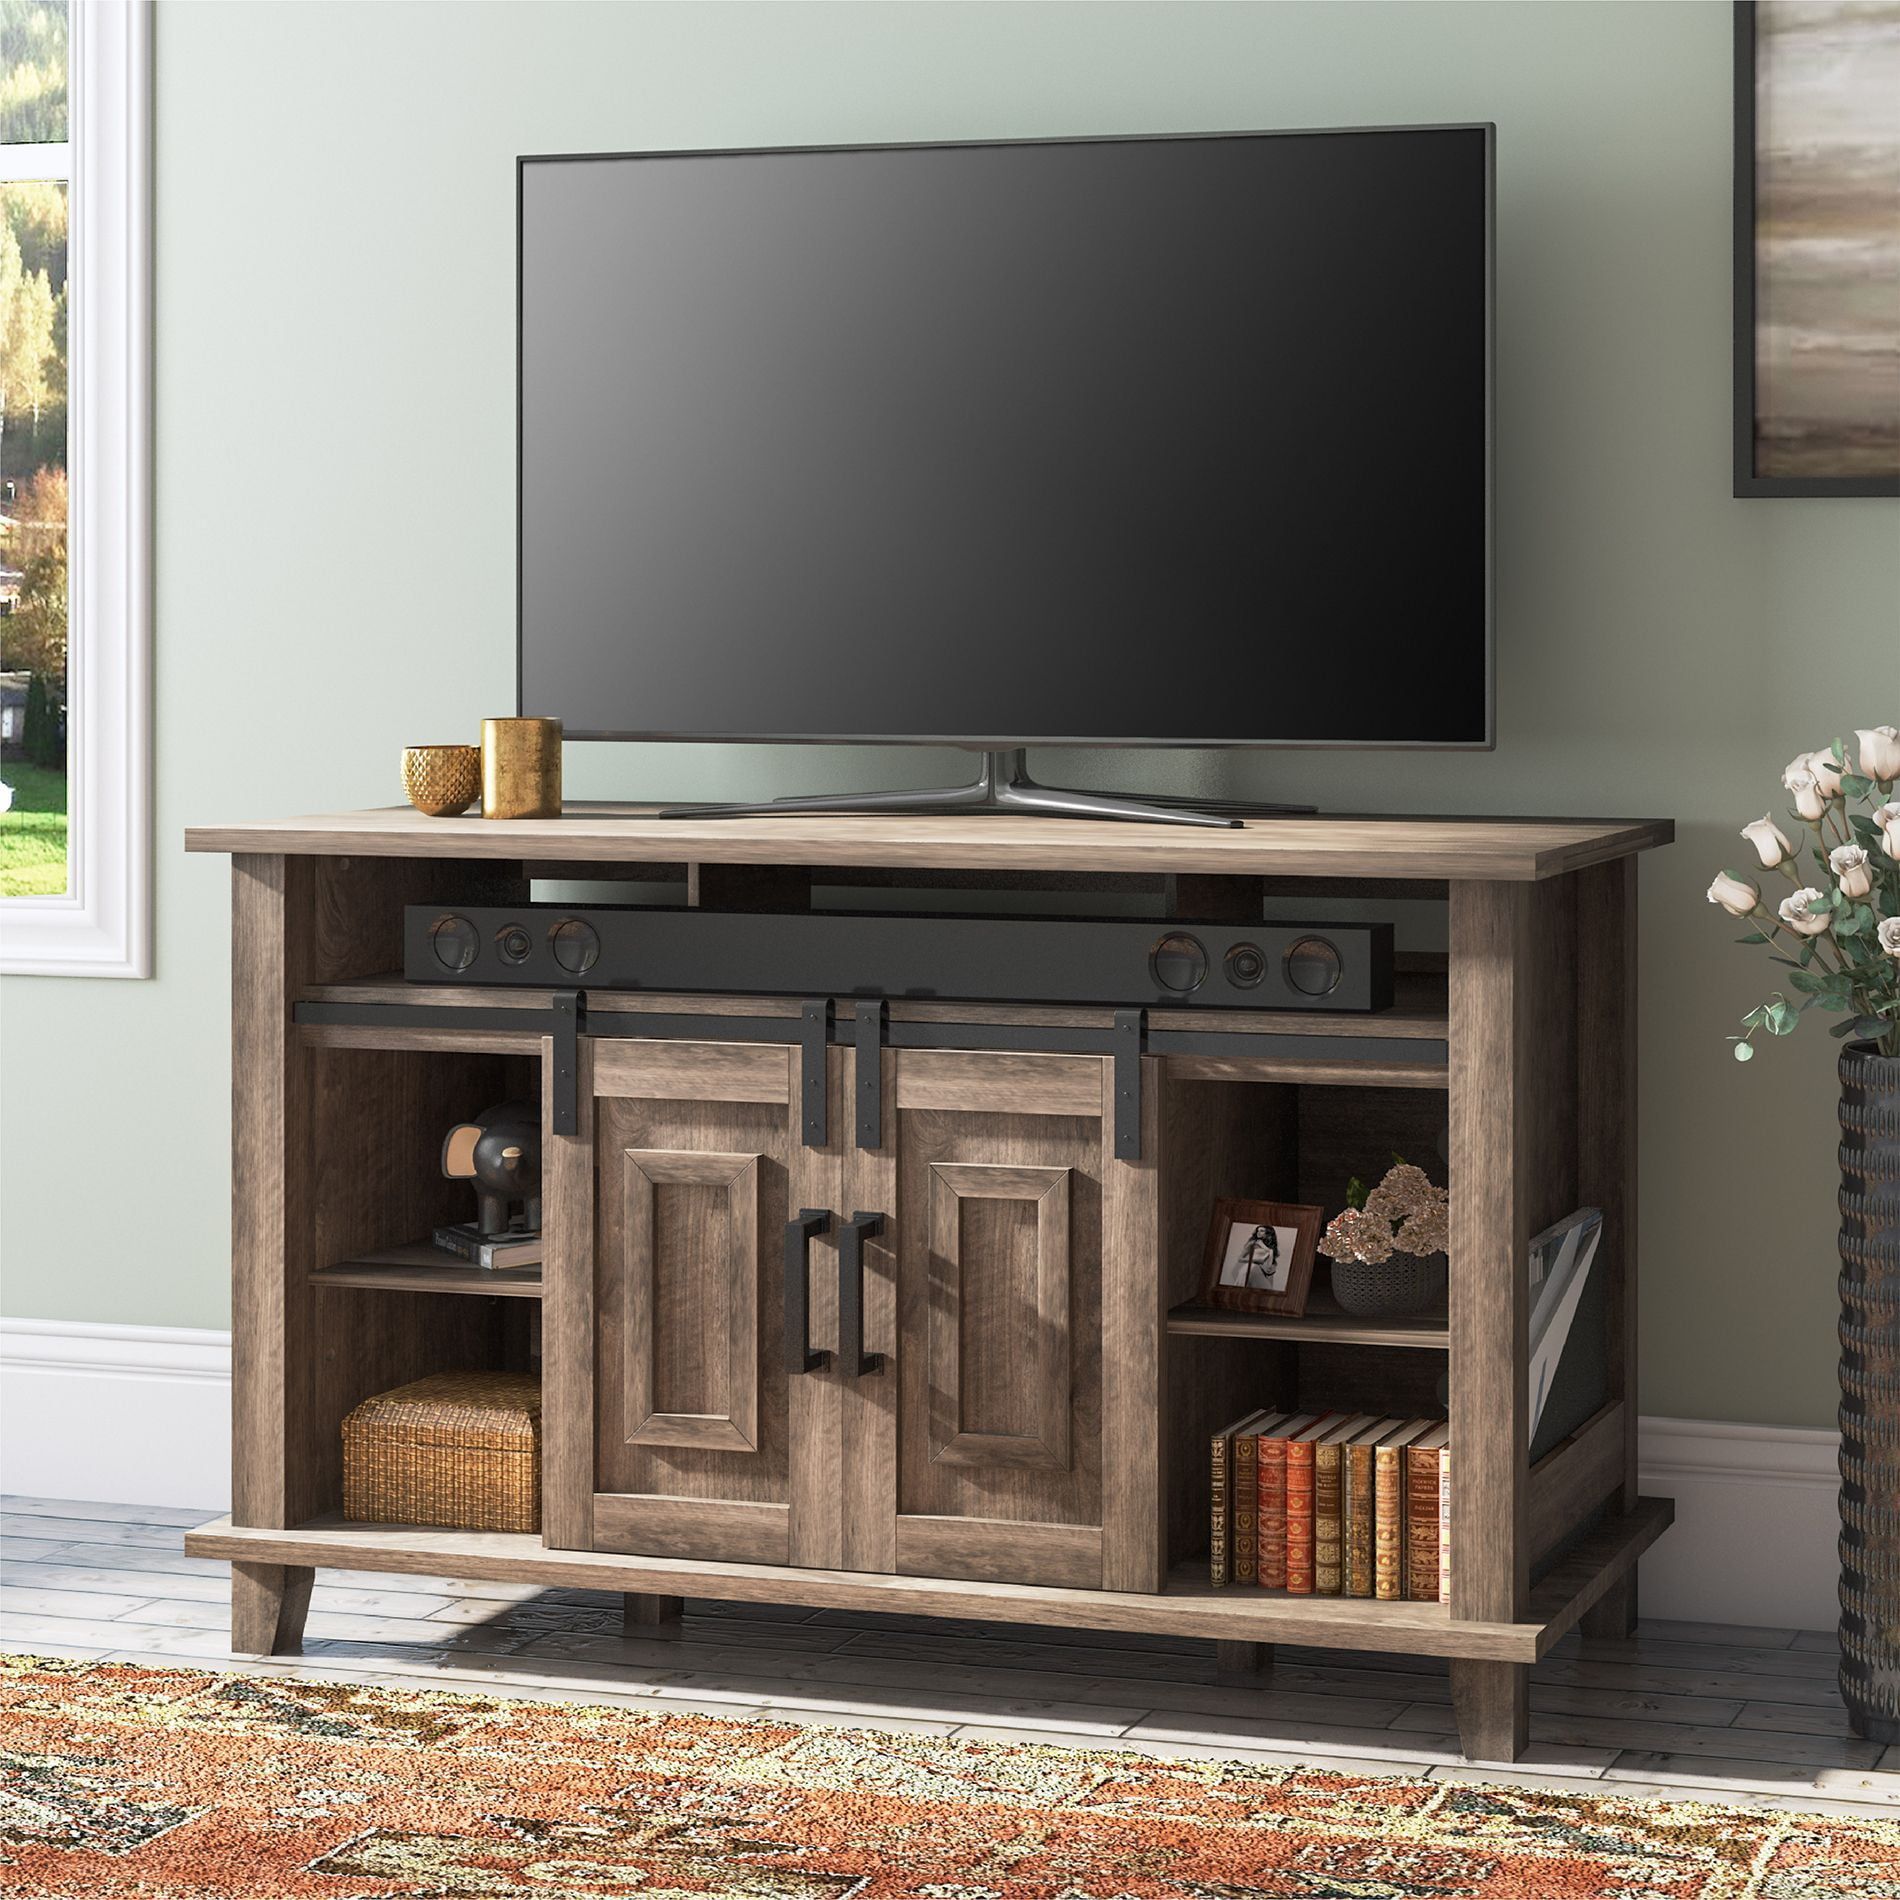 Wampat Farmhouse Sliding Barn Door Tv Stand, Gray Wood Tv Stands For 60 Within Modern Farmhouse Rustic Tv Stands (Gallery 14 of 20)